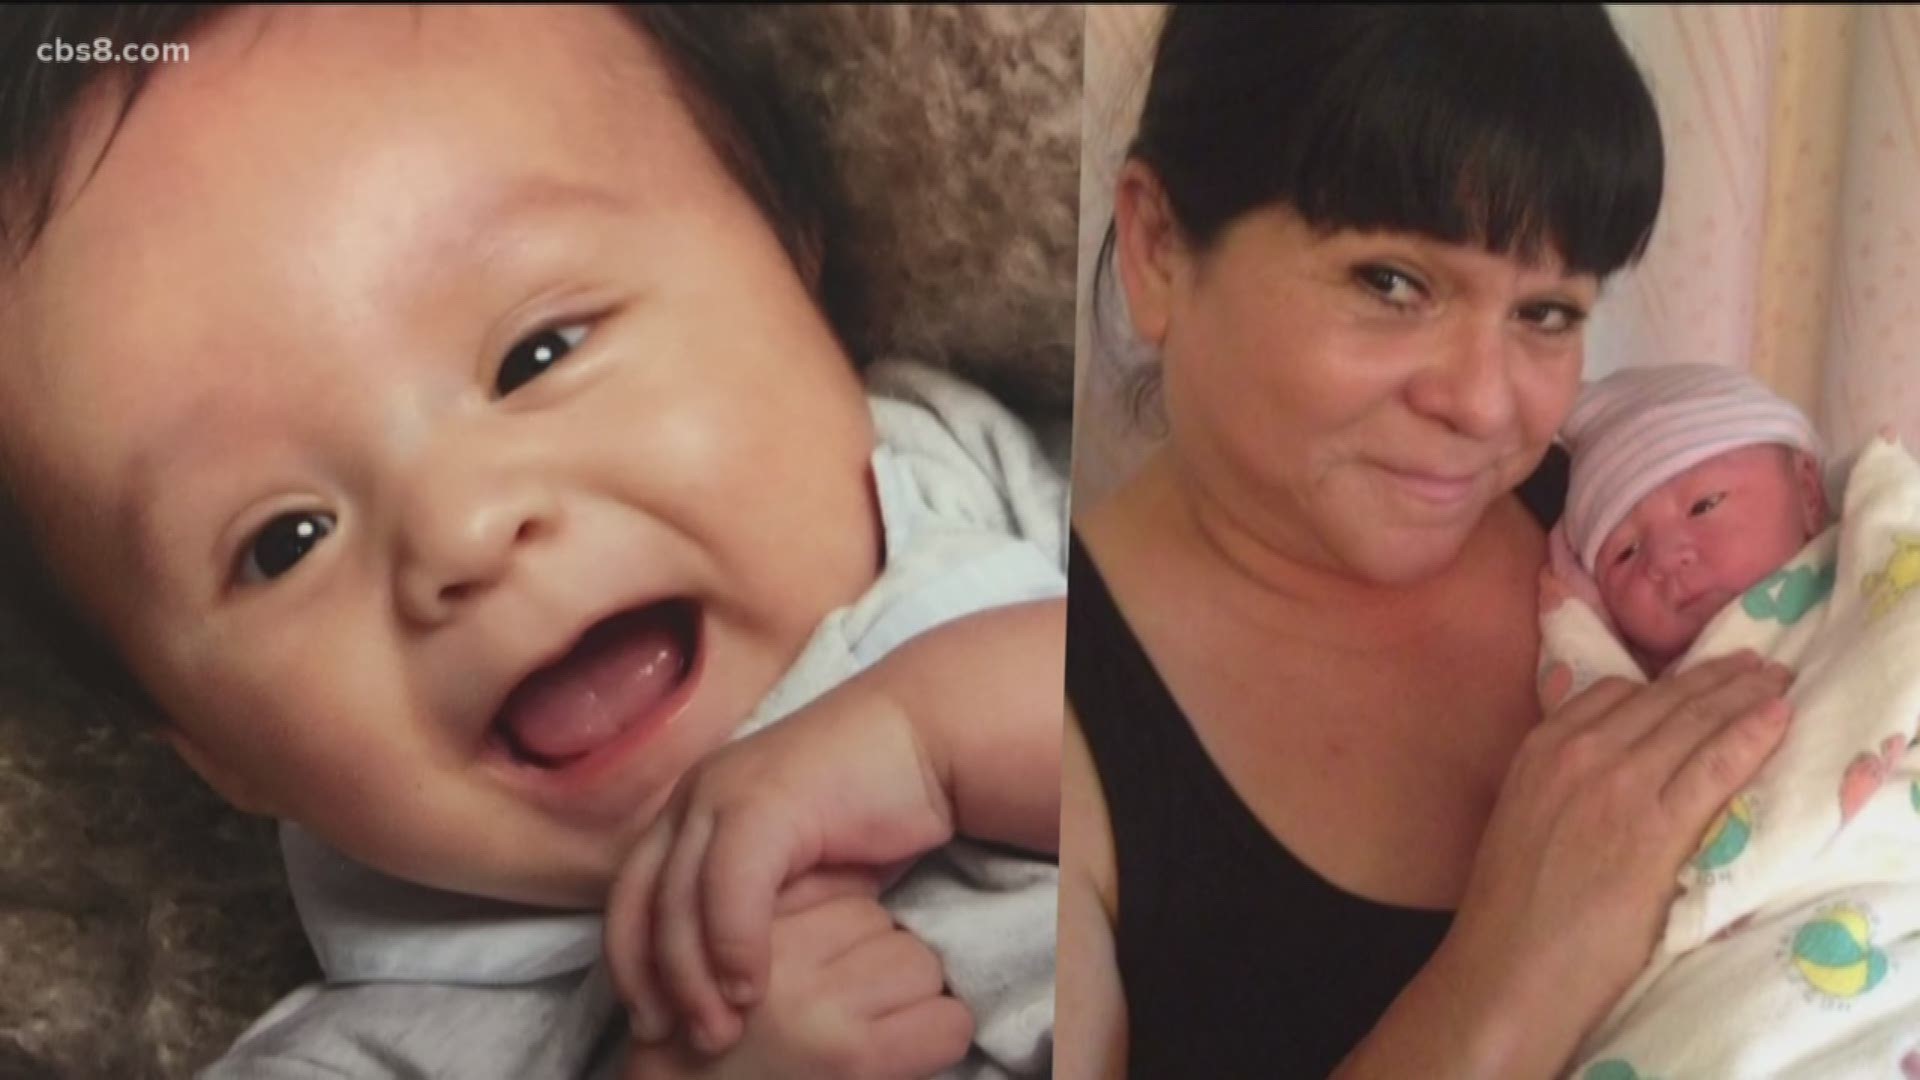 Adopt 8 San Diego Grandmother Shares Journey Of Becoming Mom Again